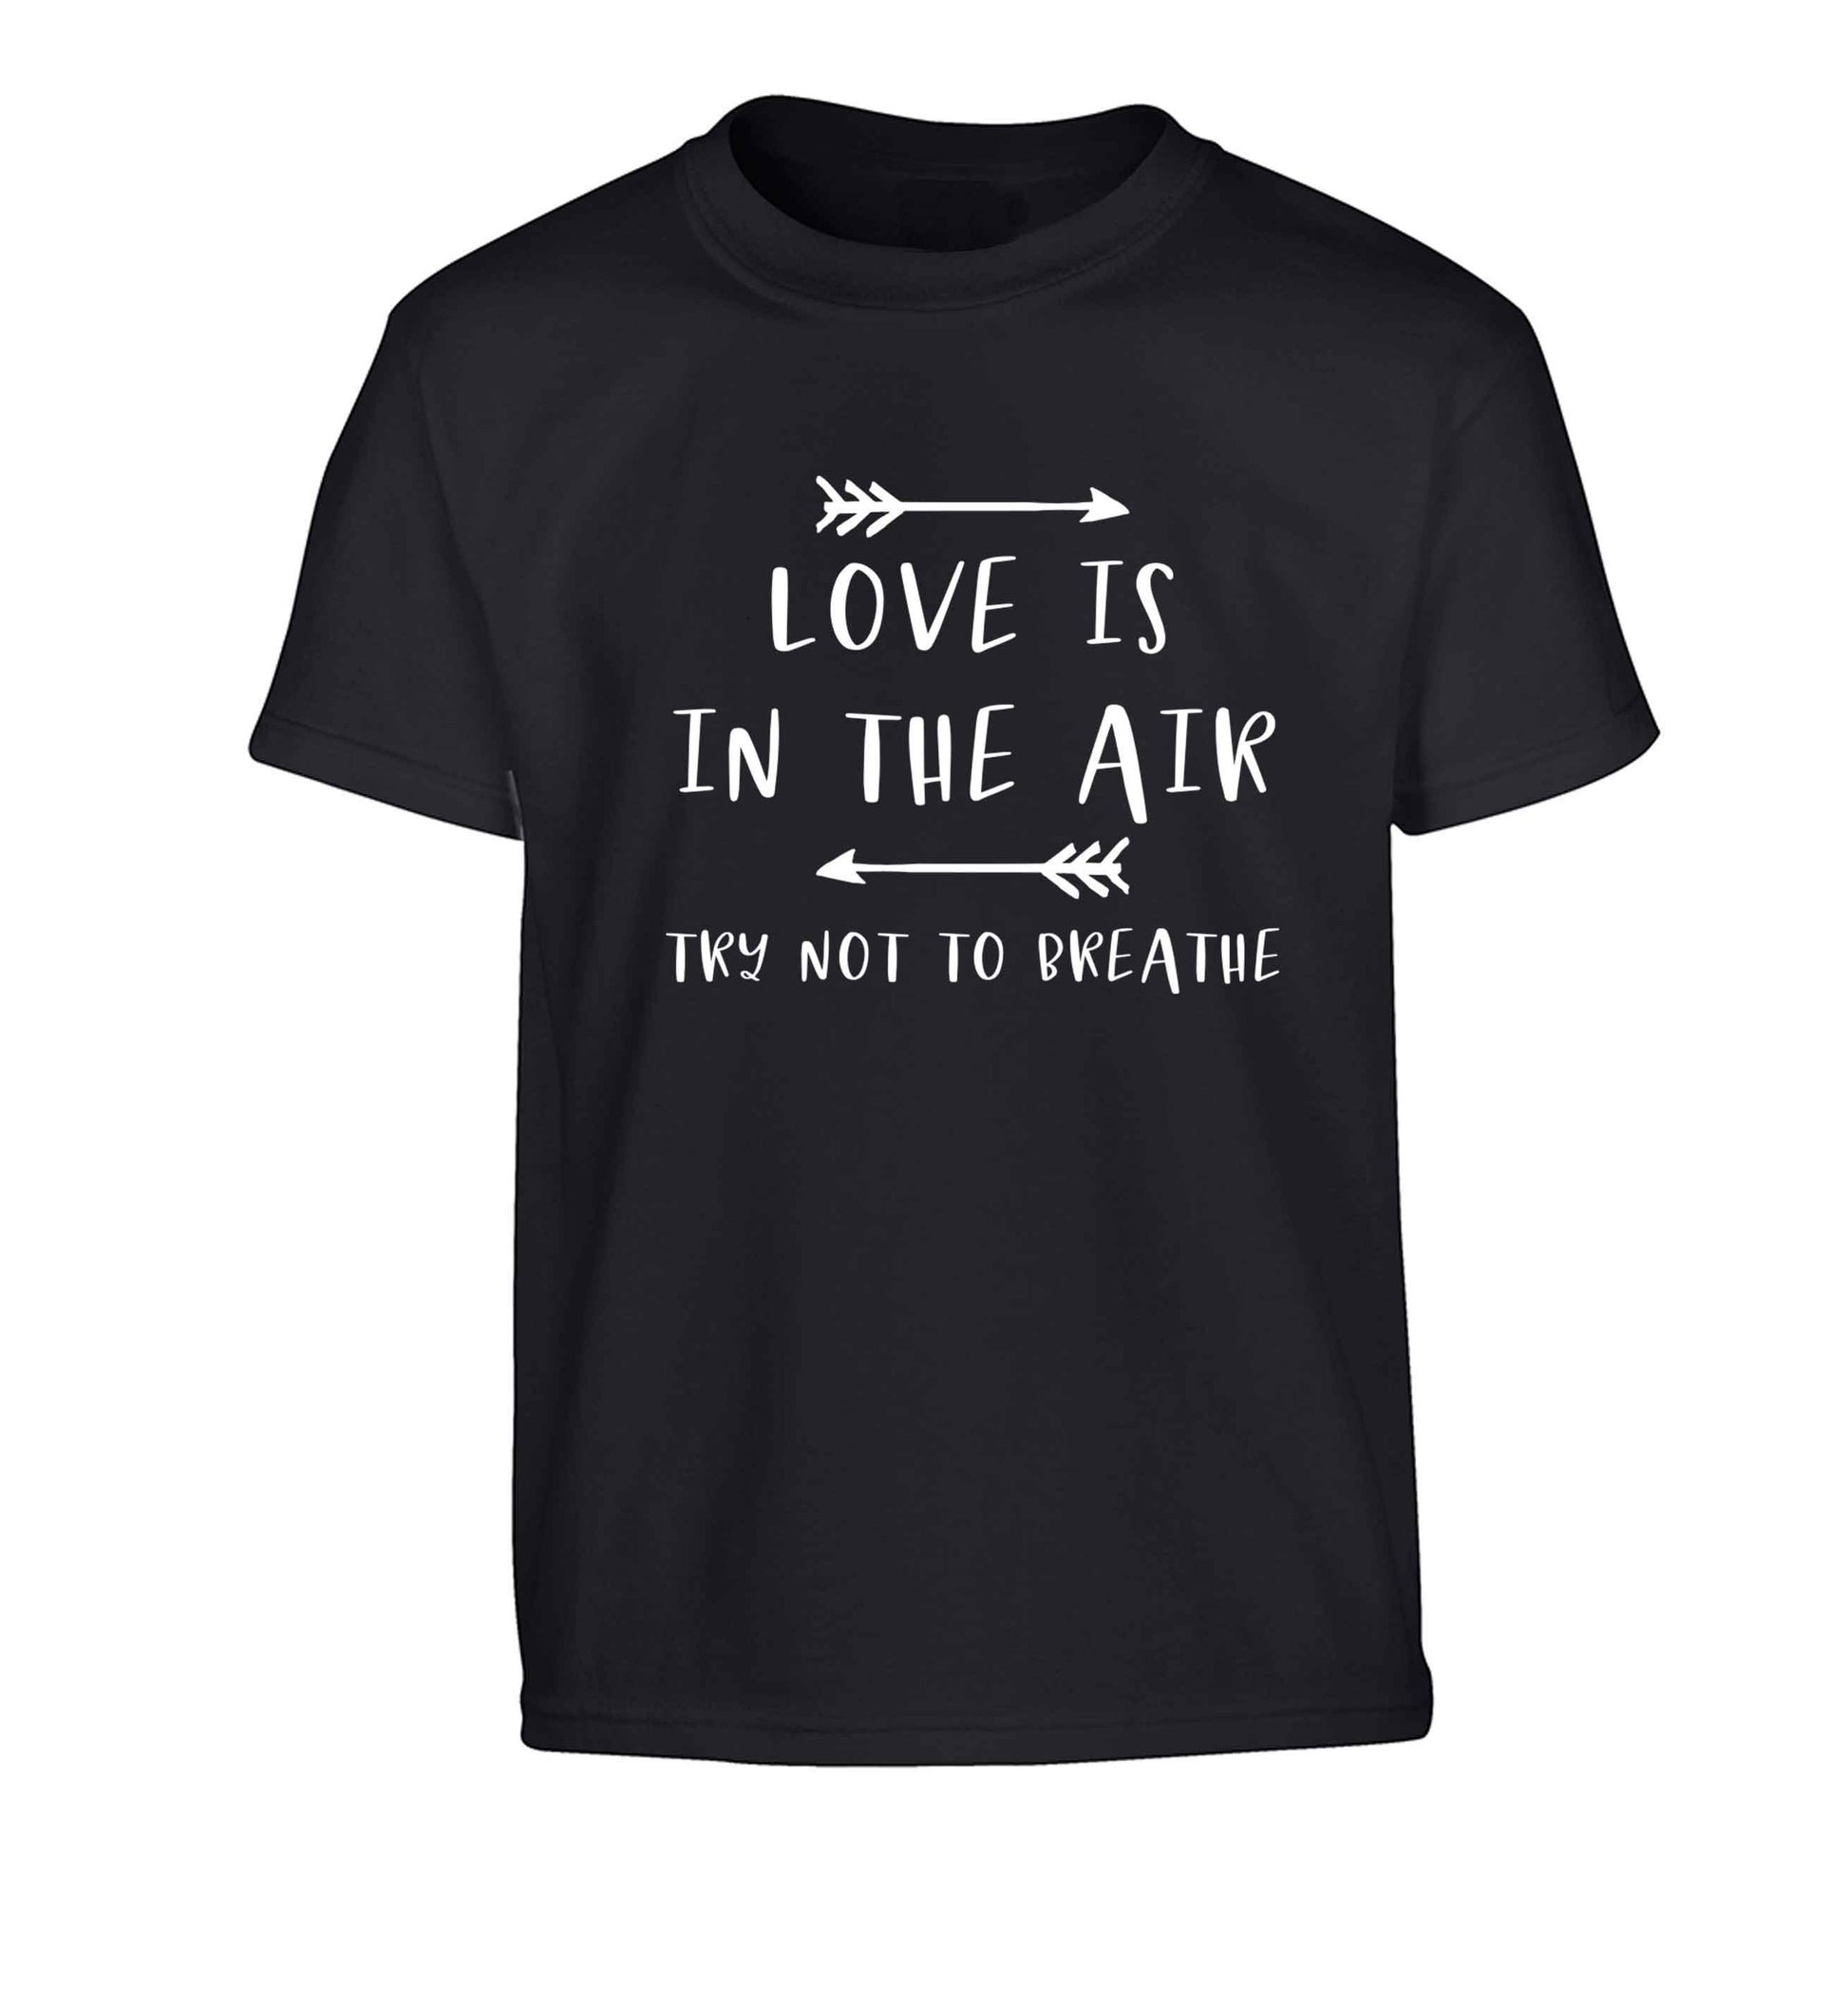 Love is in the air try not to breathe Children's black Tshirt 12-13 Years